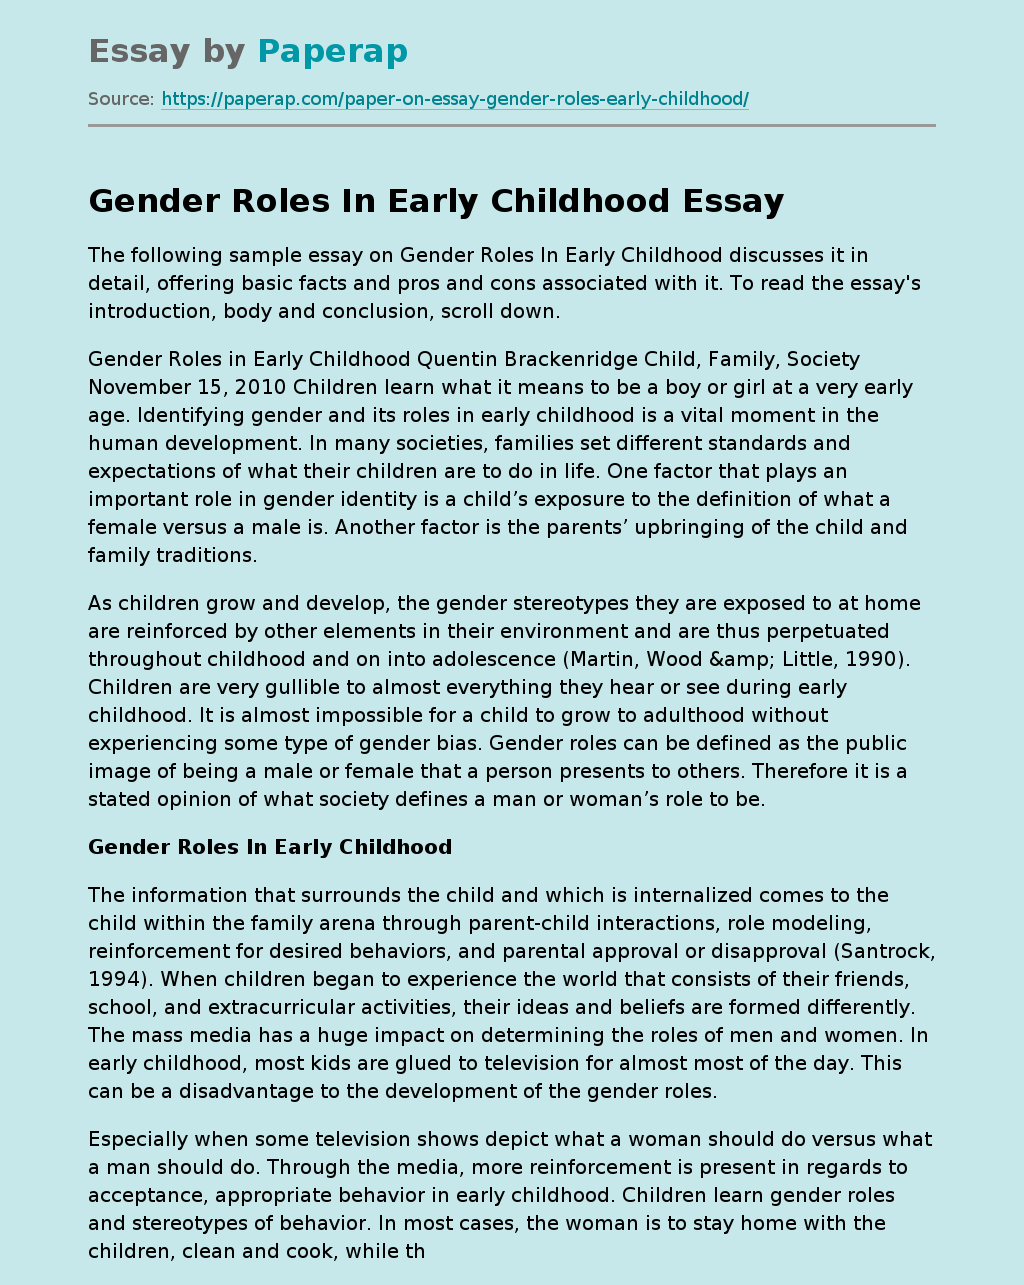 Gender Roles In Early Childhood